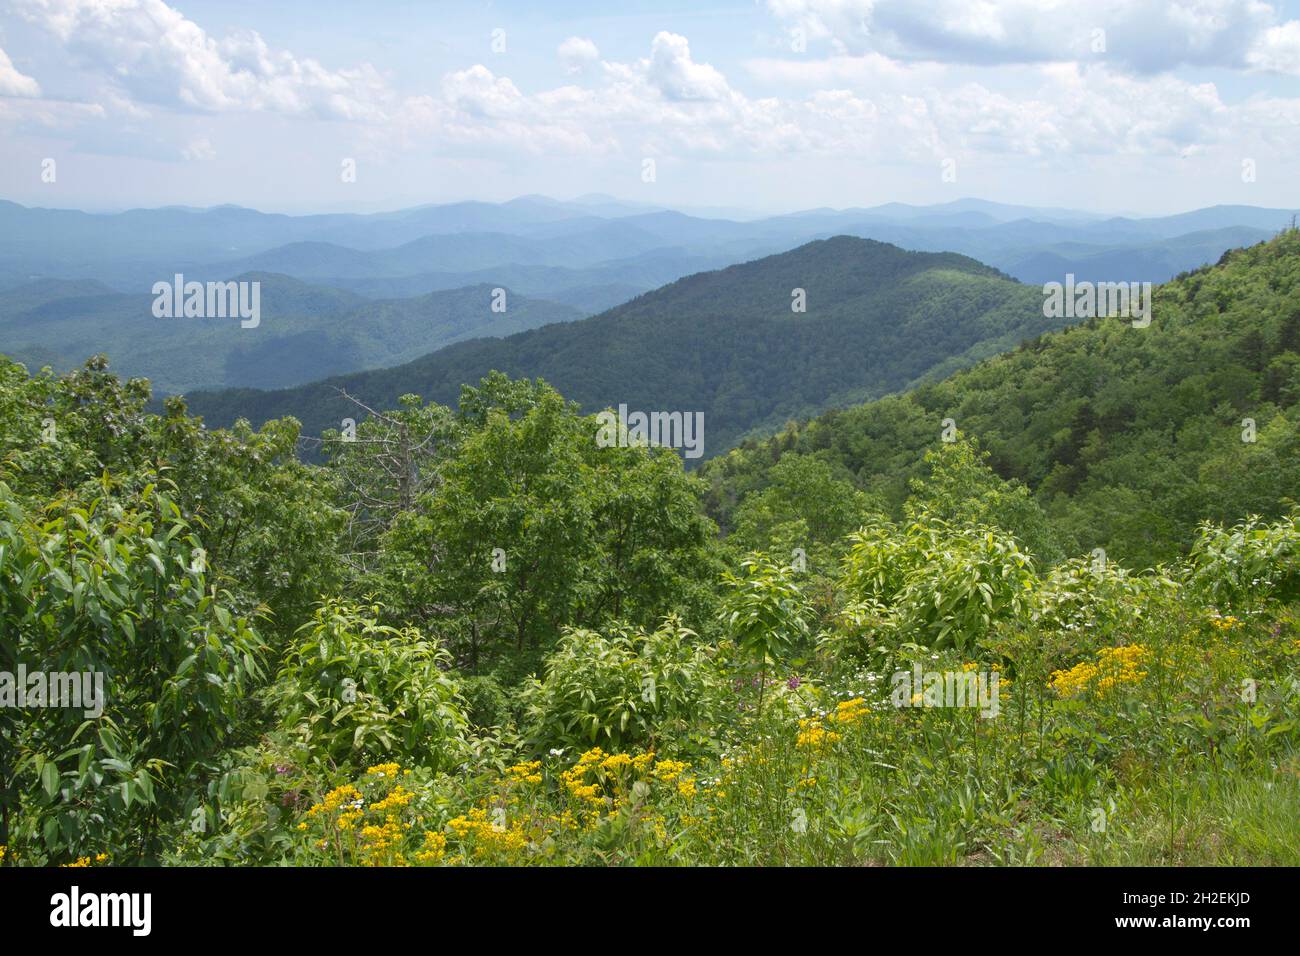 View of the beautiful, scenic Appalachian Mountains and lush vegetaion Stock Photo